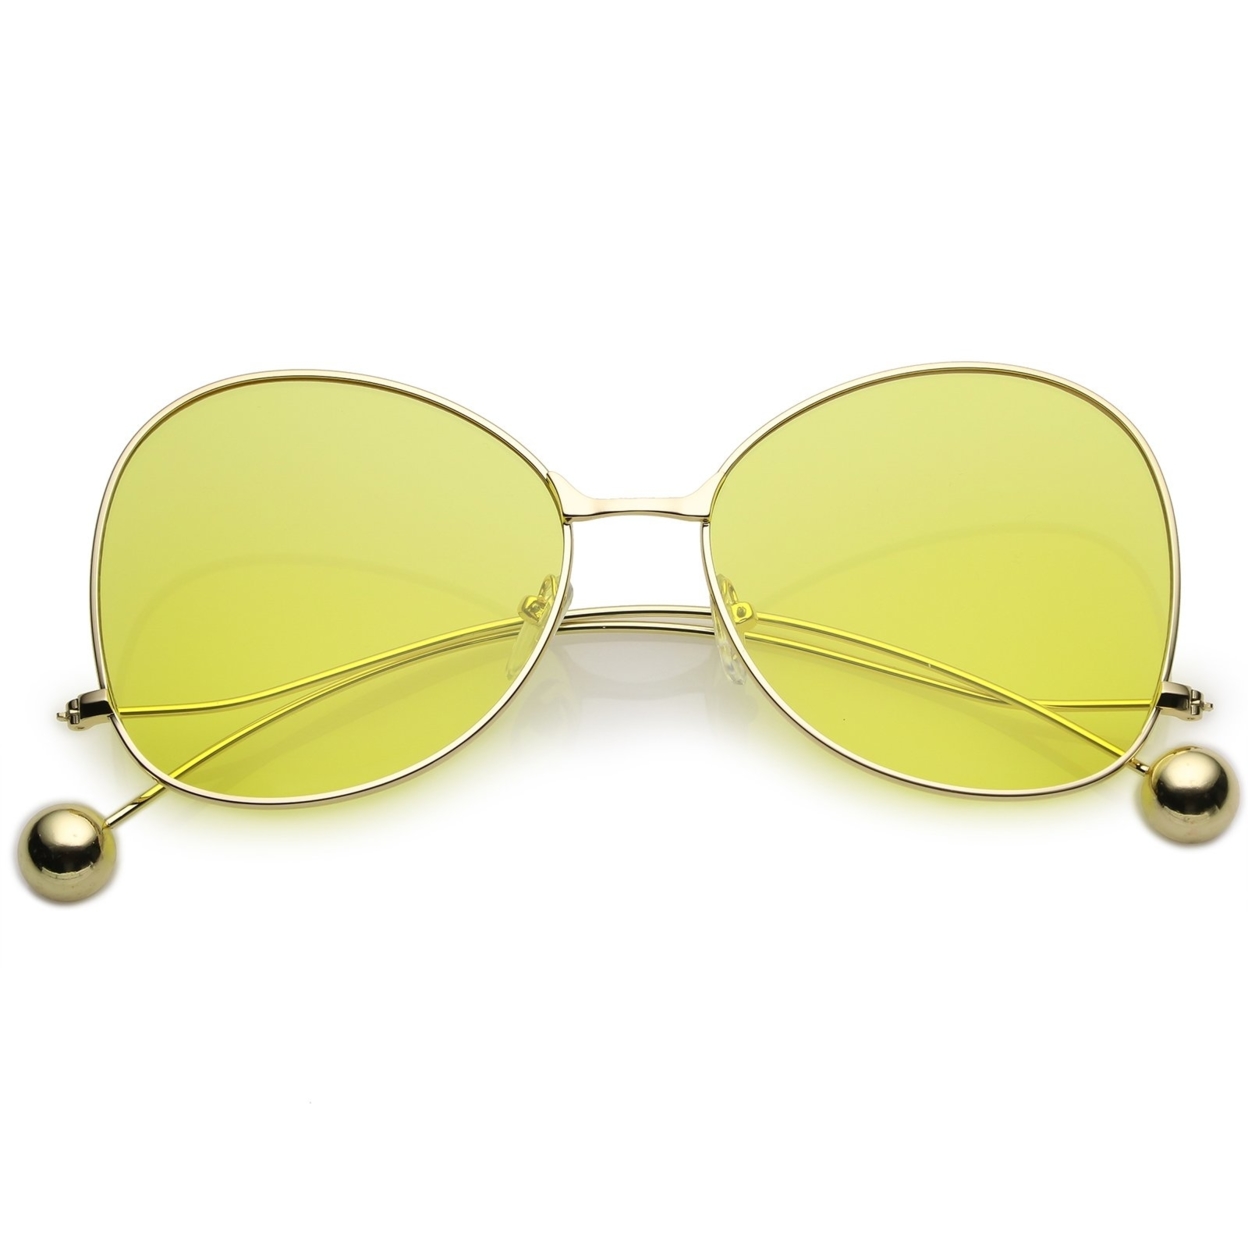 Women's Metal Butterfly Sunglasses Thin Curved Arms Ball Accent Color Tinted Flat Lens 56mm - Gold / Yellow